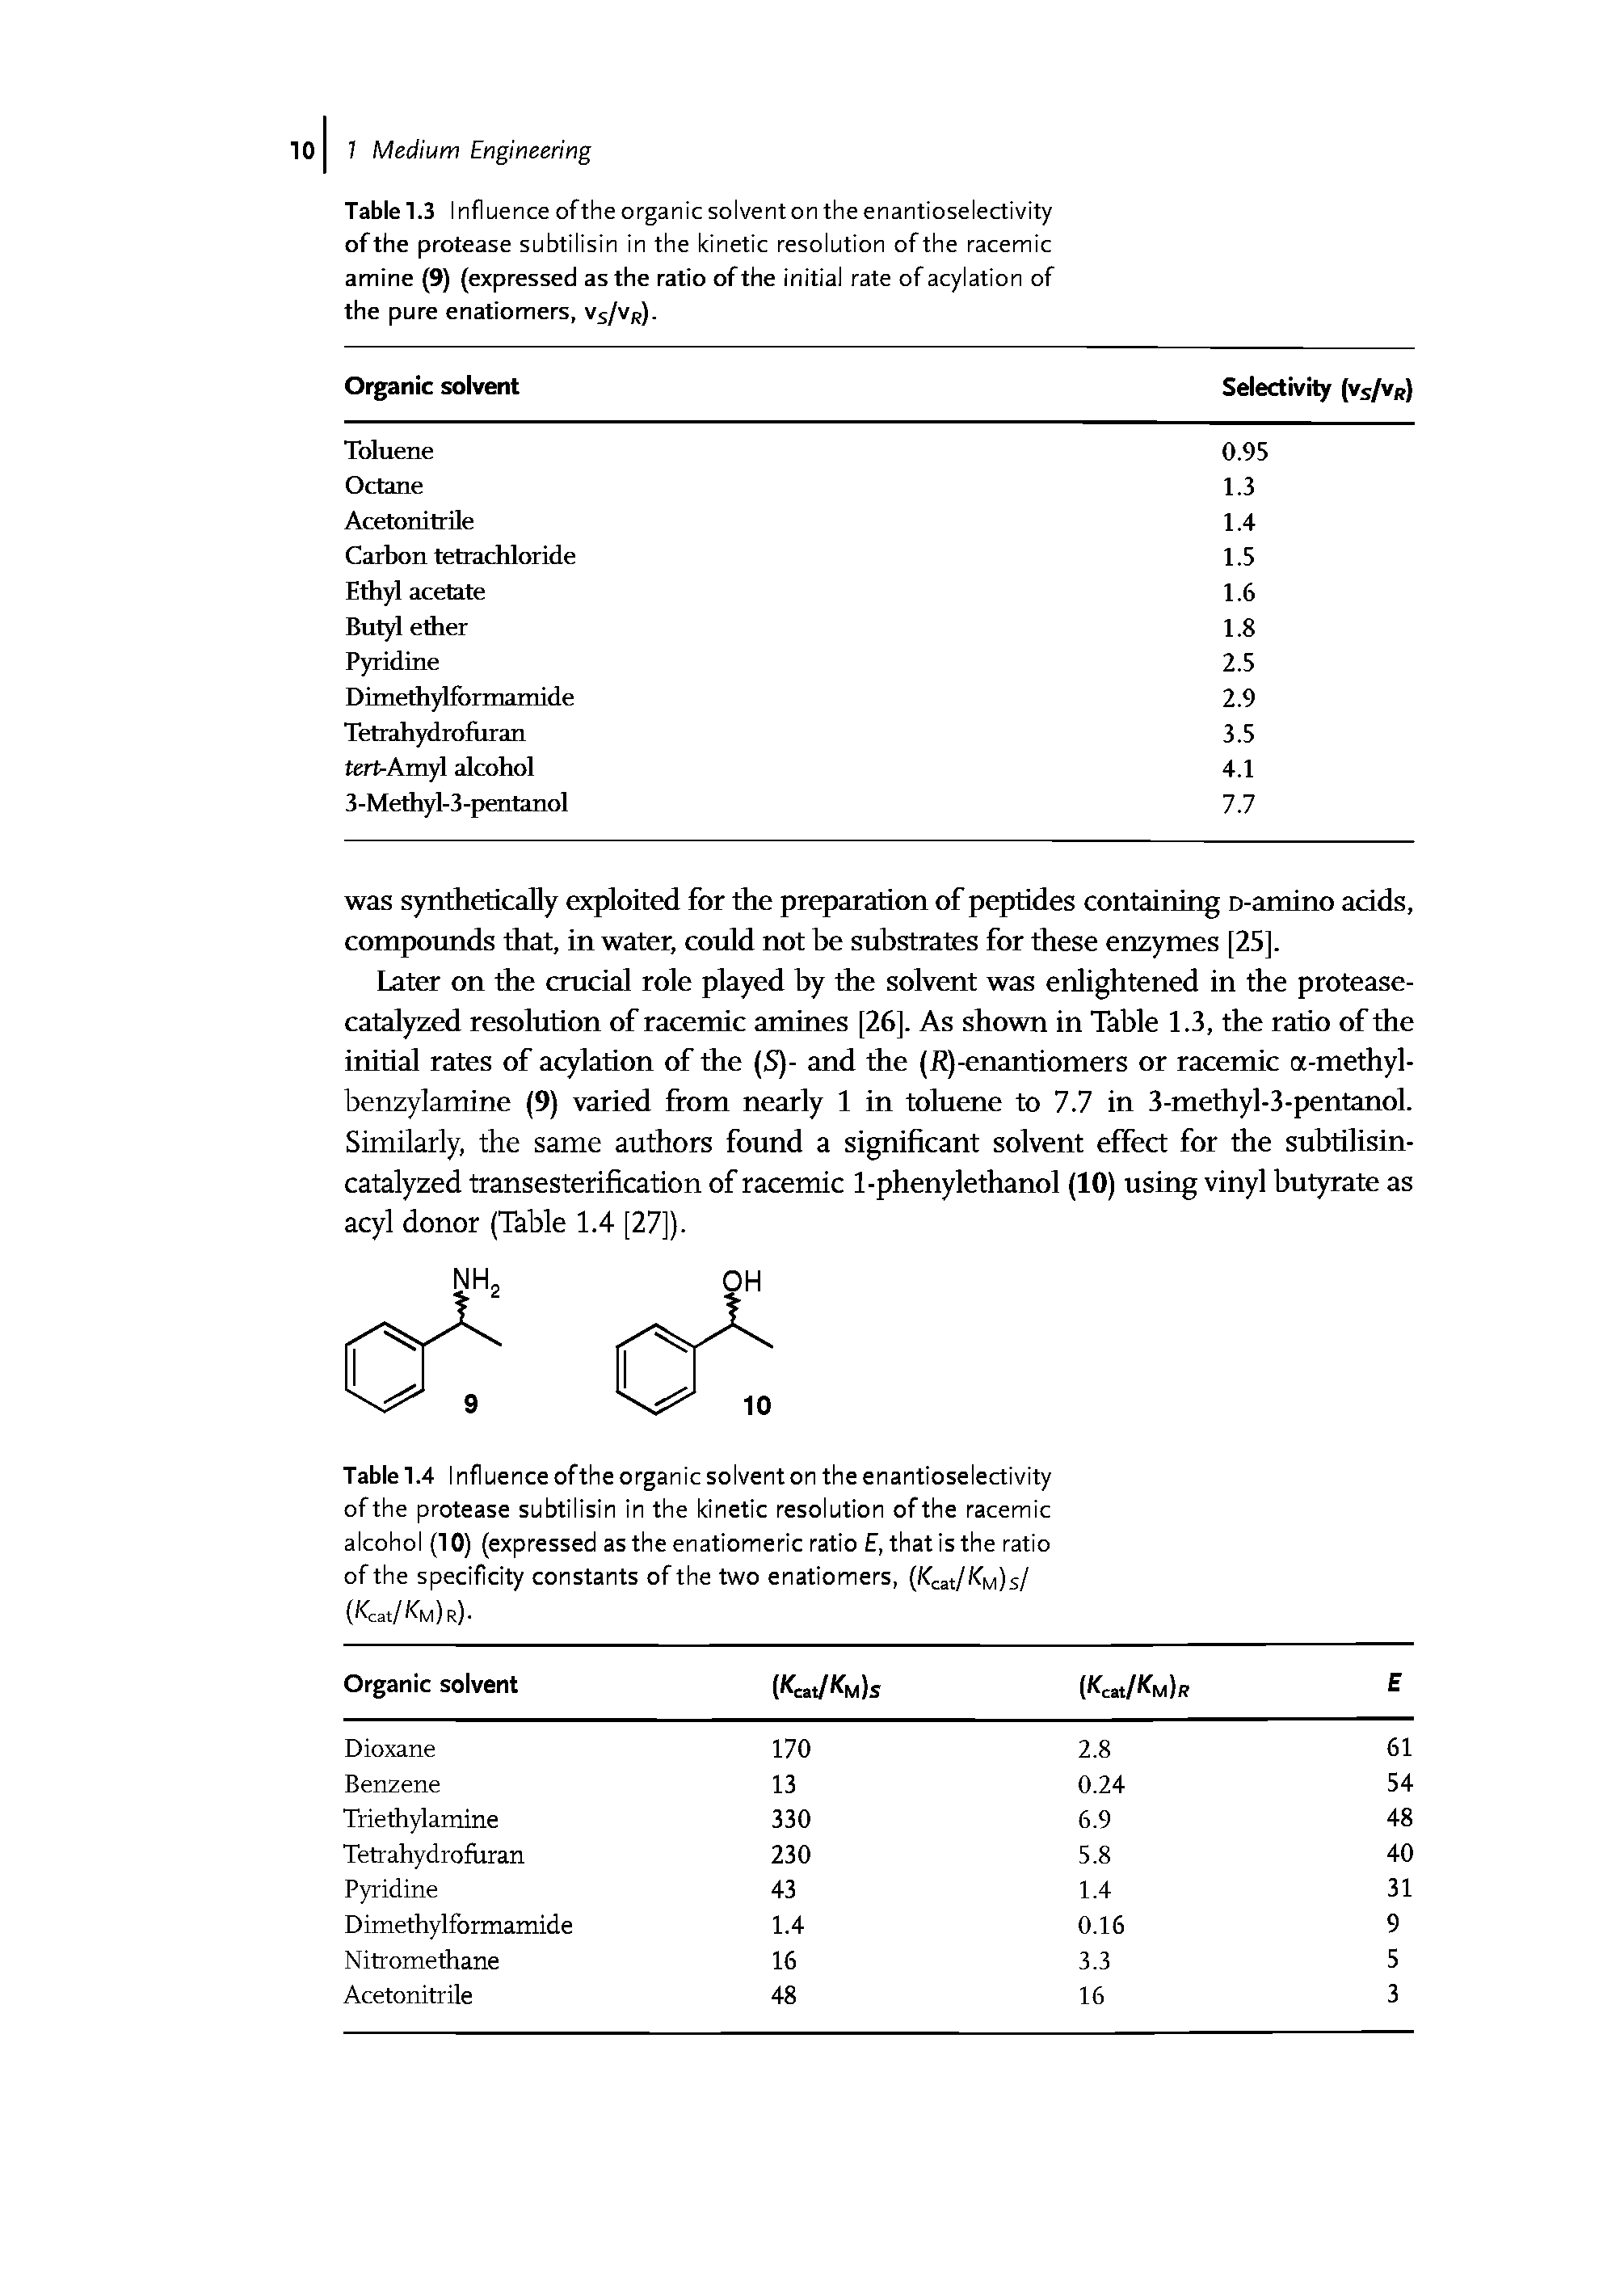 Table 1.4 I nfluence ofthe organic solvent on the enantioselectivity ofthe protease subtilisin in the kinetic resolution ofthe racemic alcohol (10) (expressed as the enatiomeric ratio E, that is the ratio of the specificity constants of the two enatiomers, (lfcat/ M)s/...